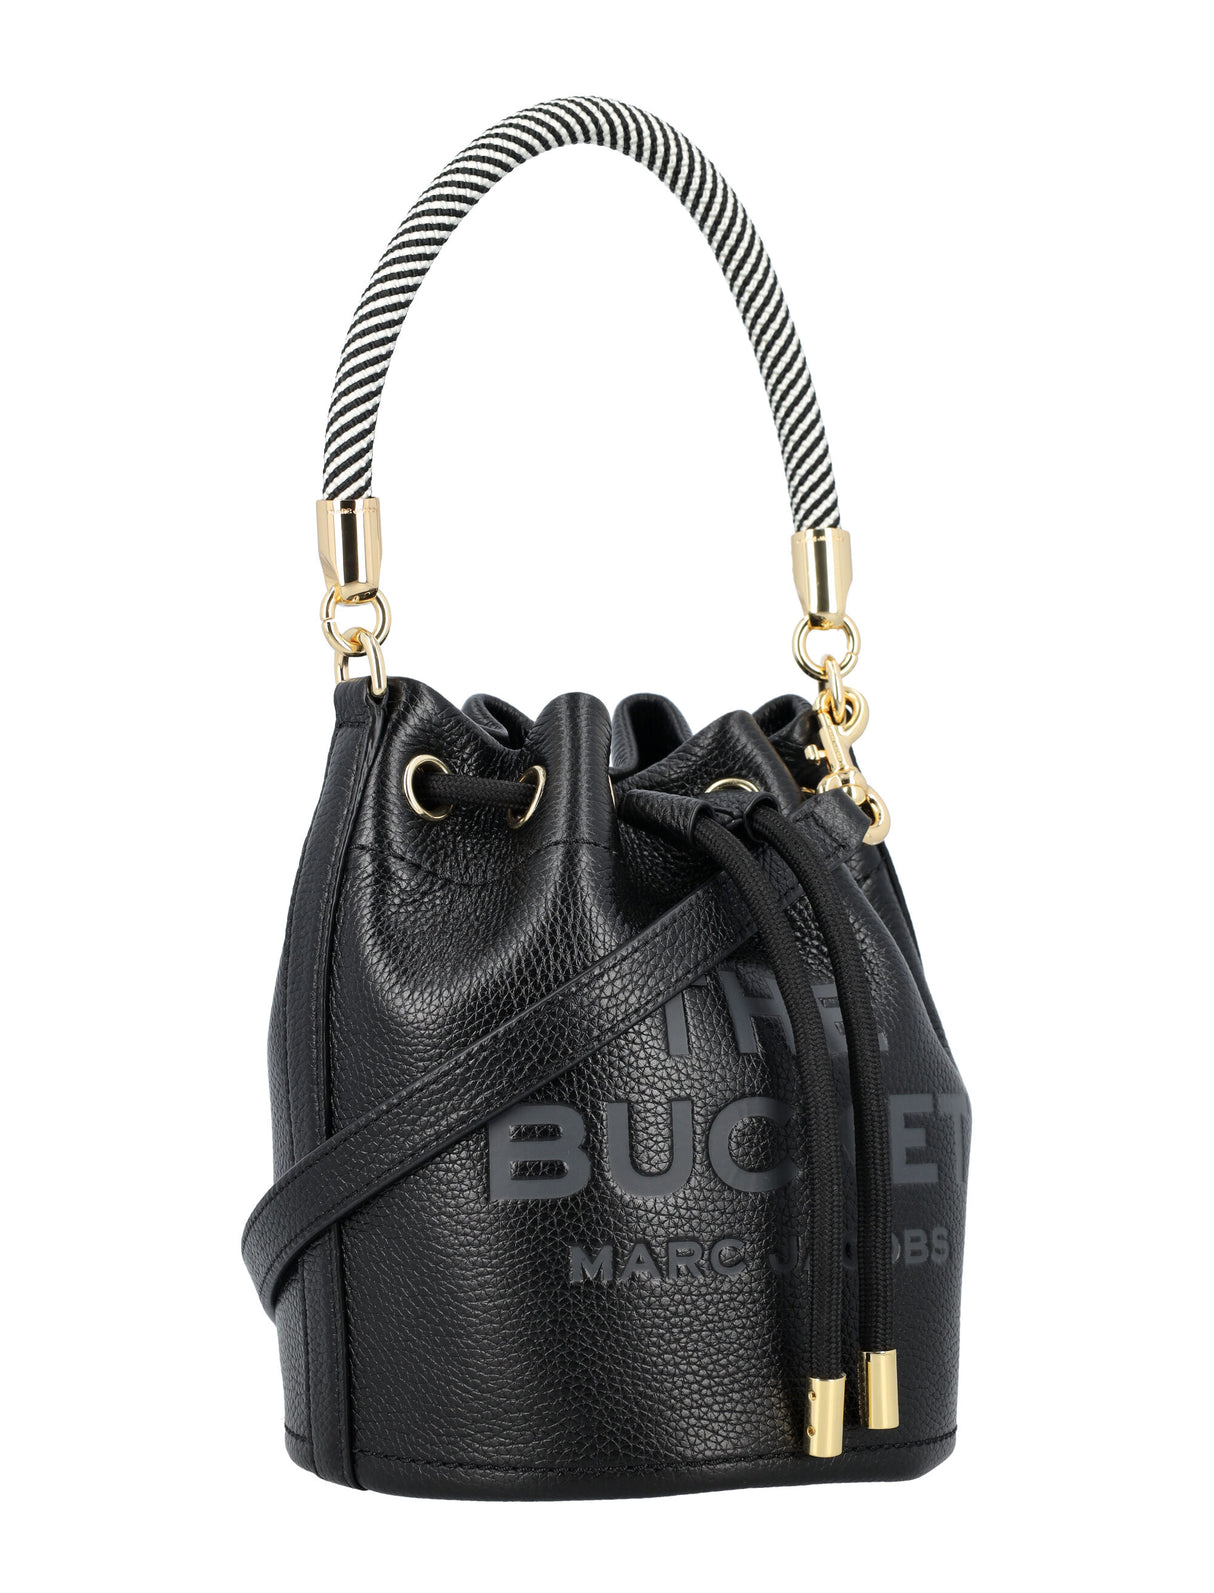 GRAIN LEATHER BUCKET HANDBAG BY MARC JACOBS - SS24 COLLECTION